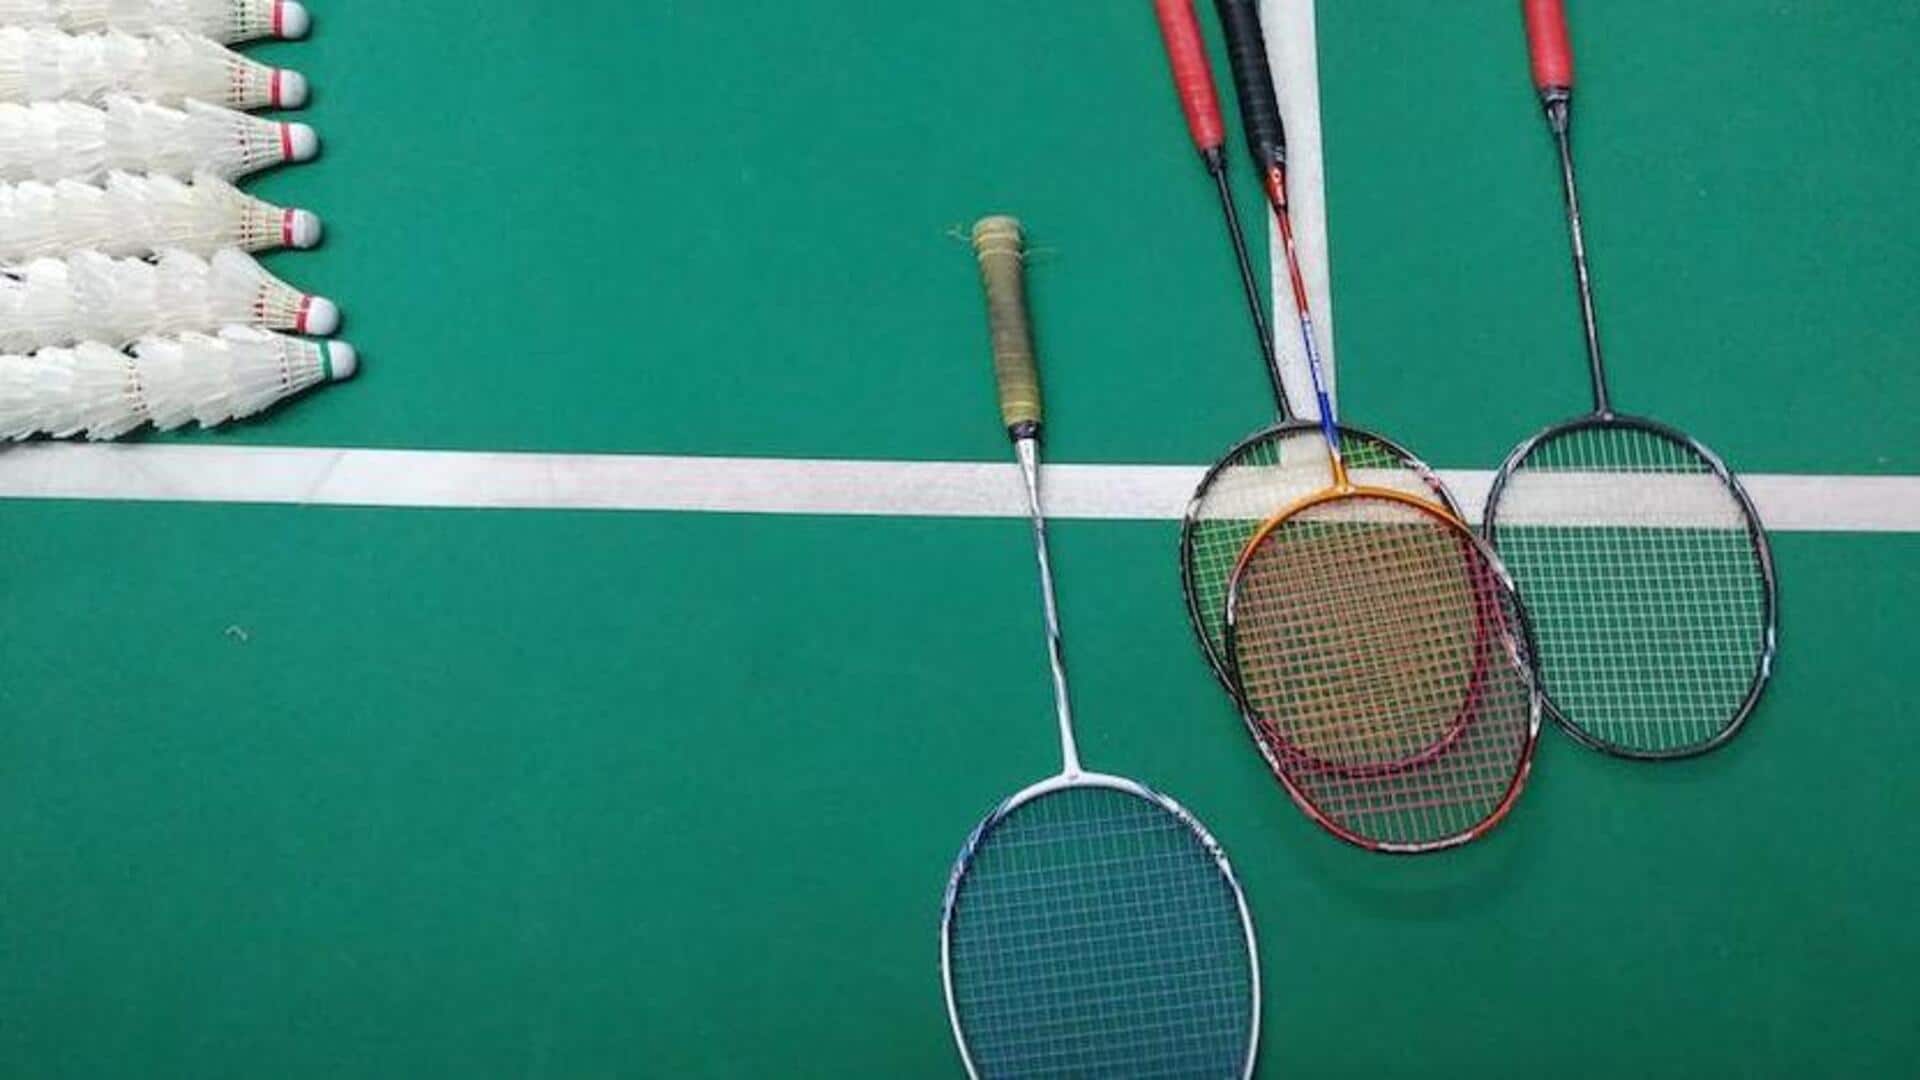 Did you know these interesting facts about badminton